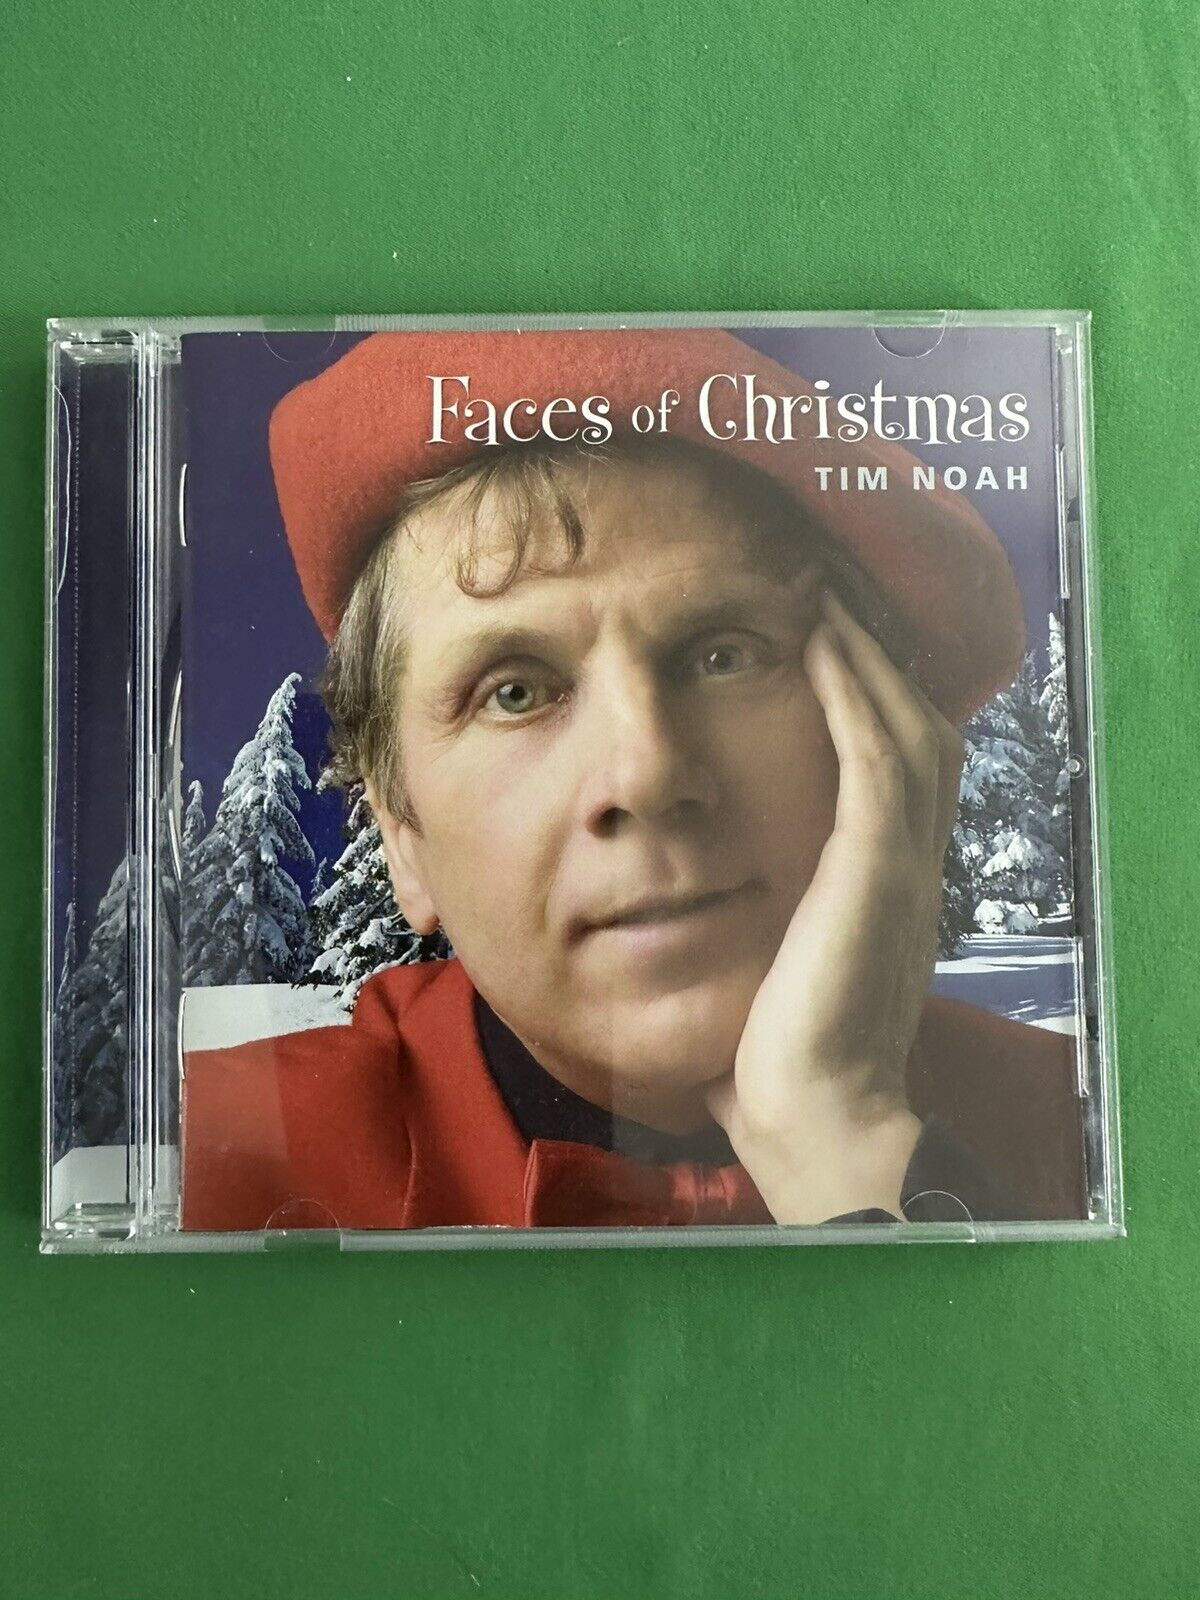 TIM NOAH Faces of Christmas Holiday Music CD